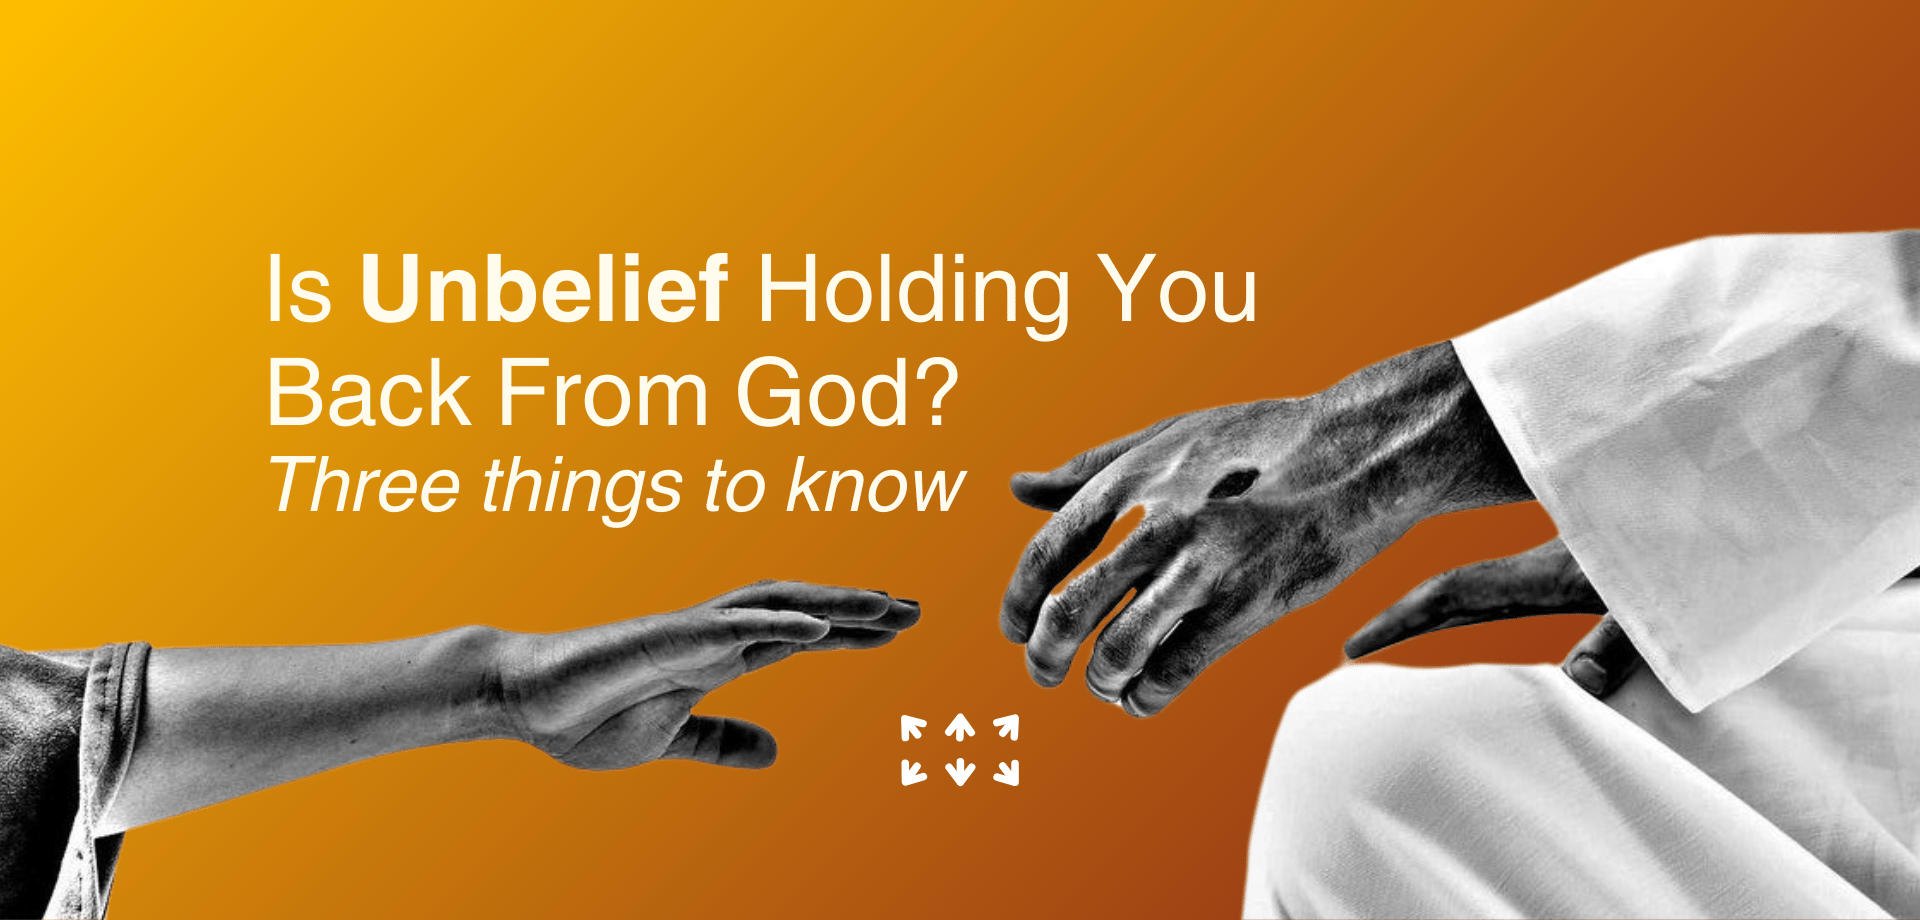  Is Unbelief Holding You Back From God?